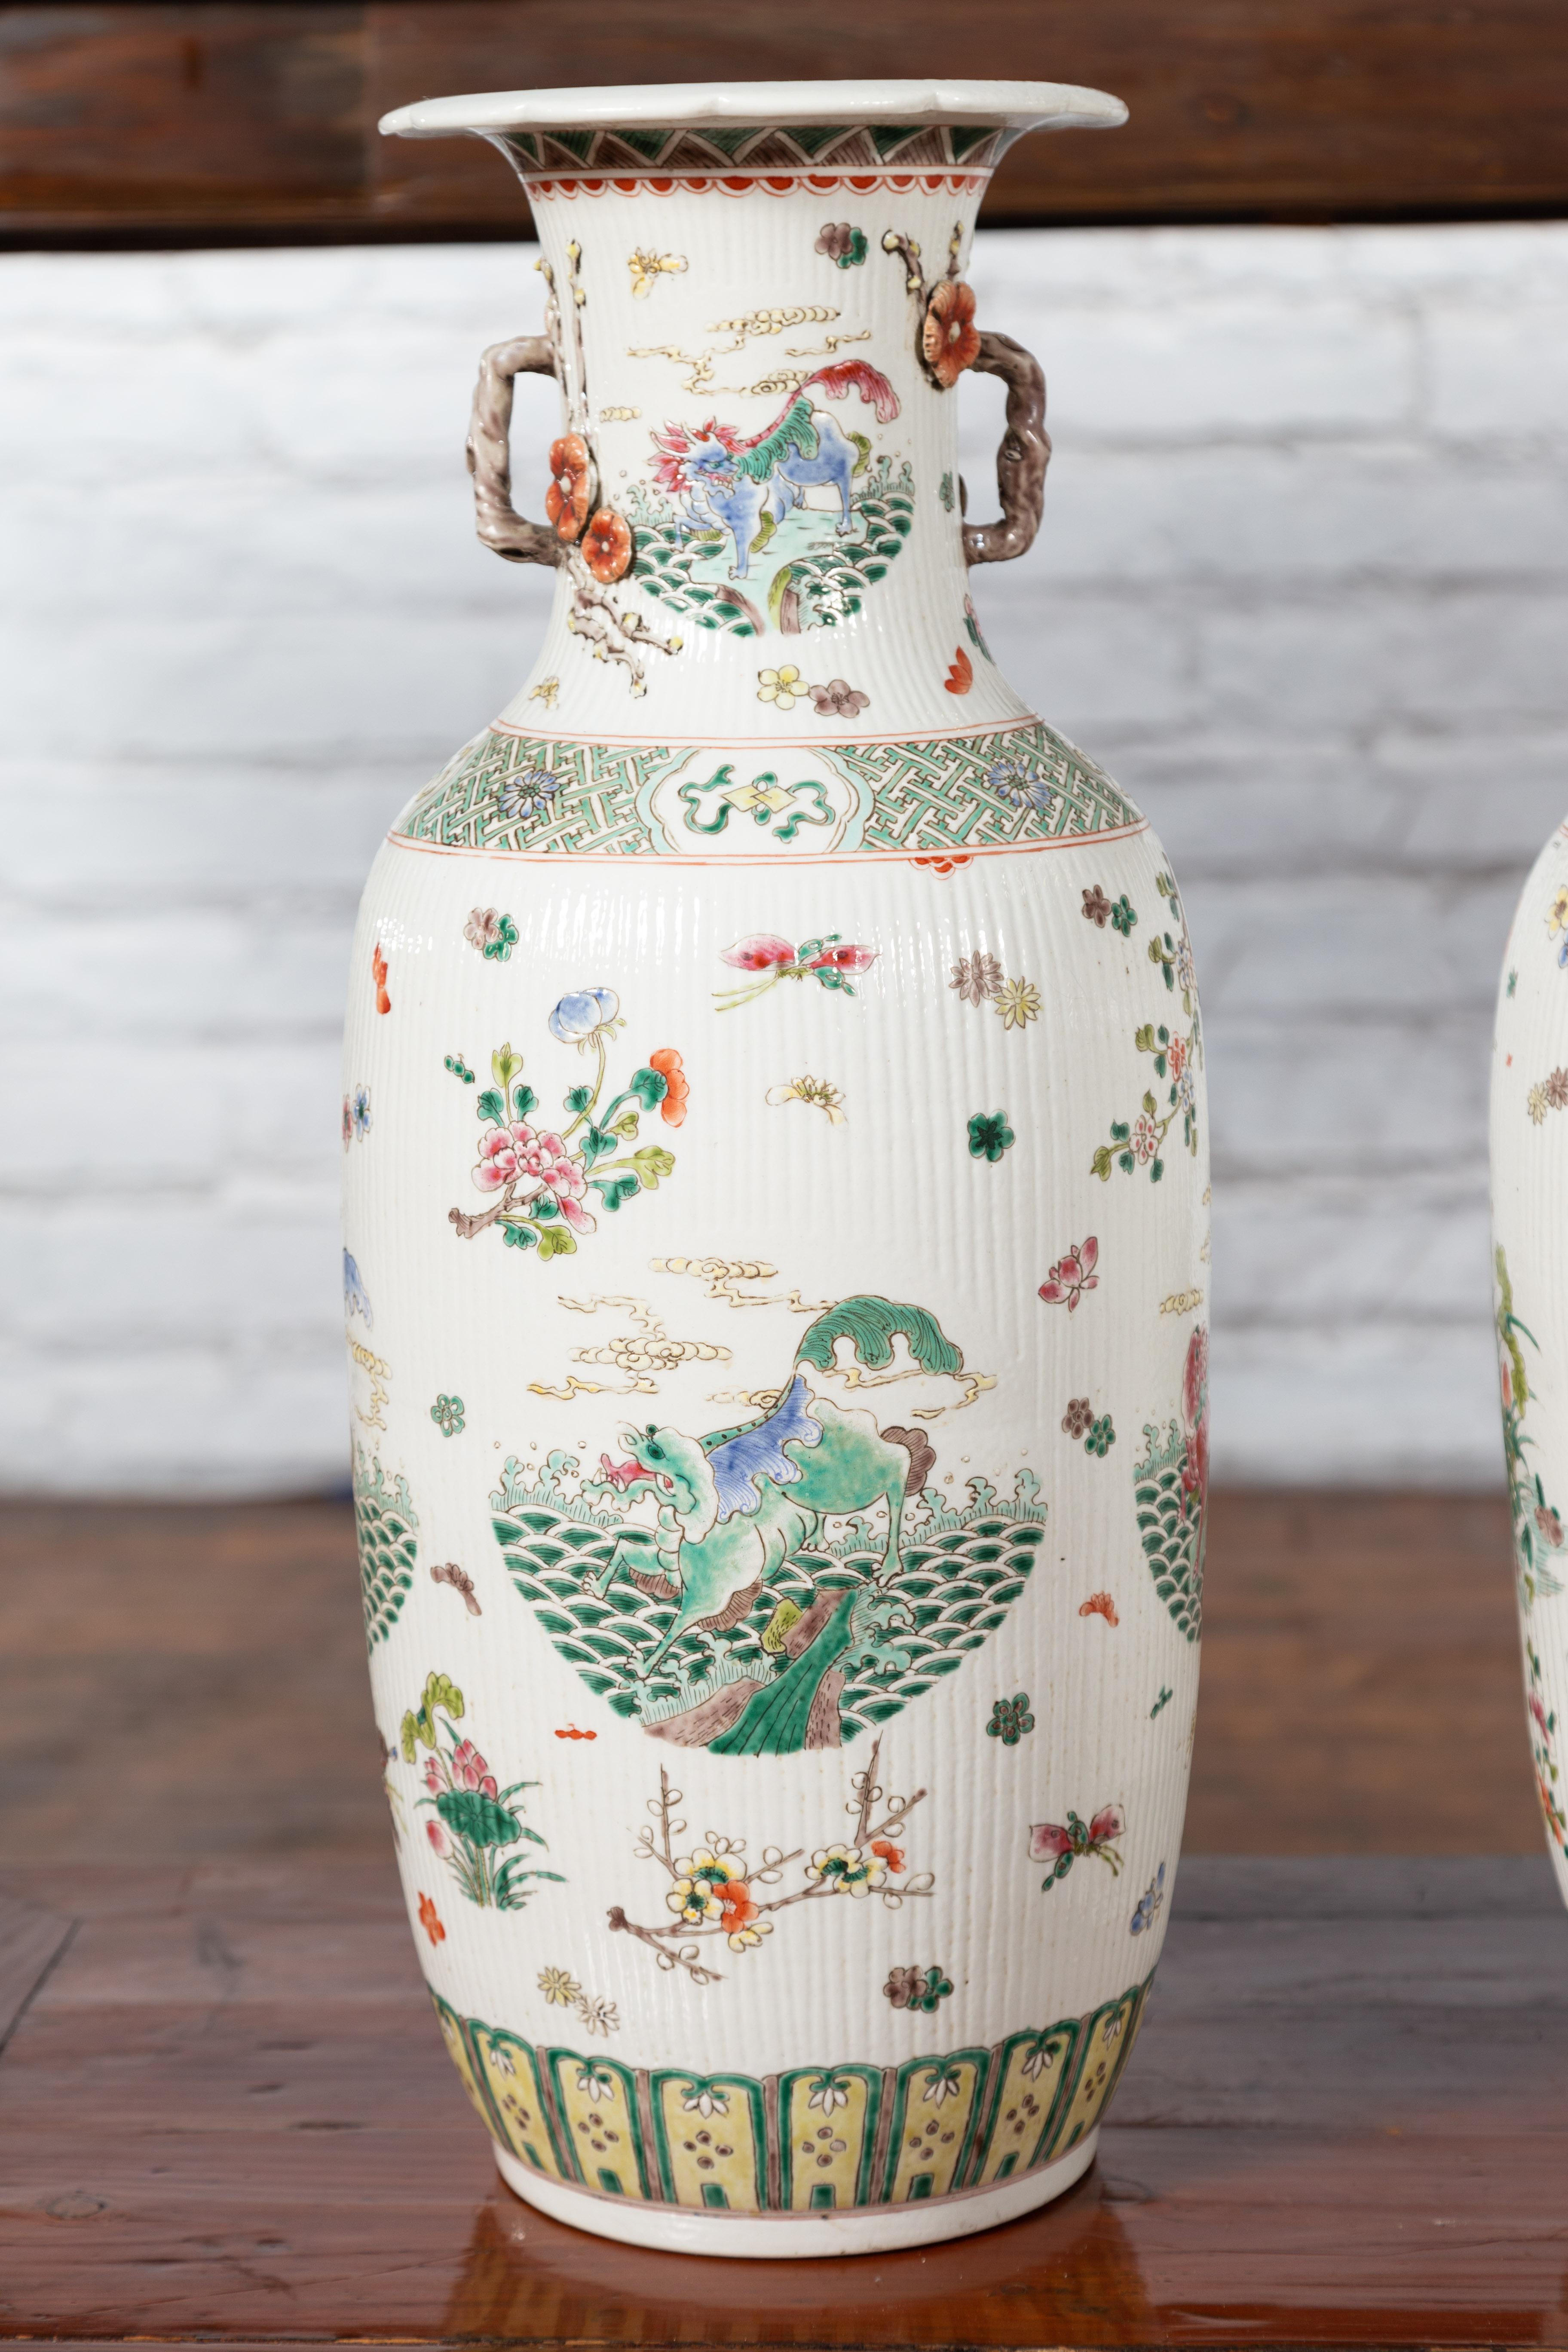 Antique Chinese Porcelain Vases with Hand-Painted Flowers and Mythical Animals 1